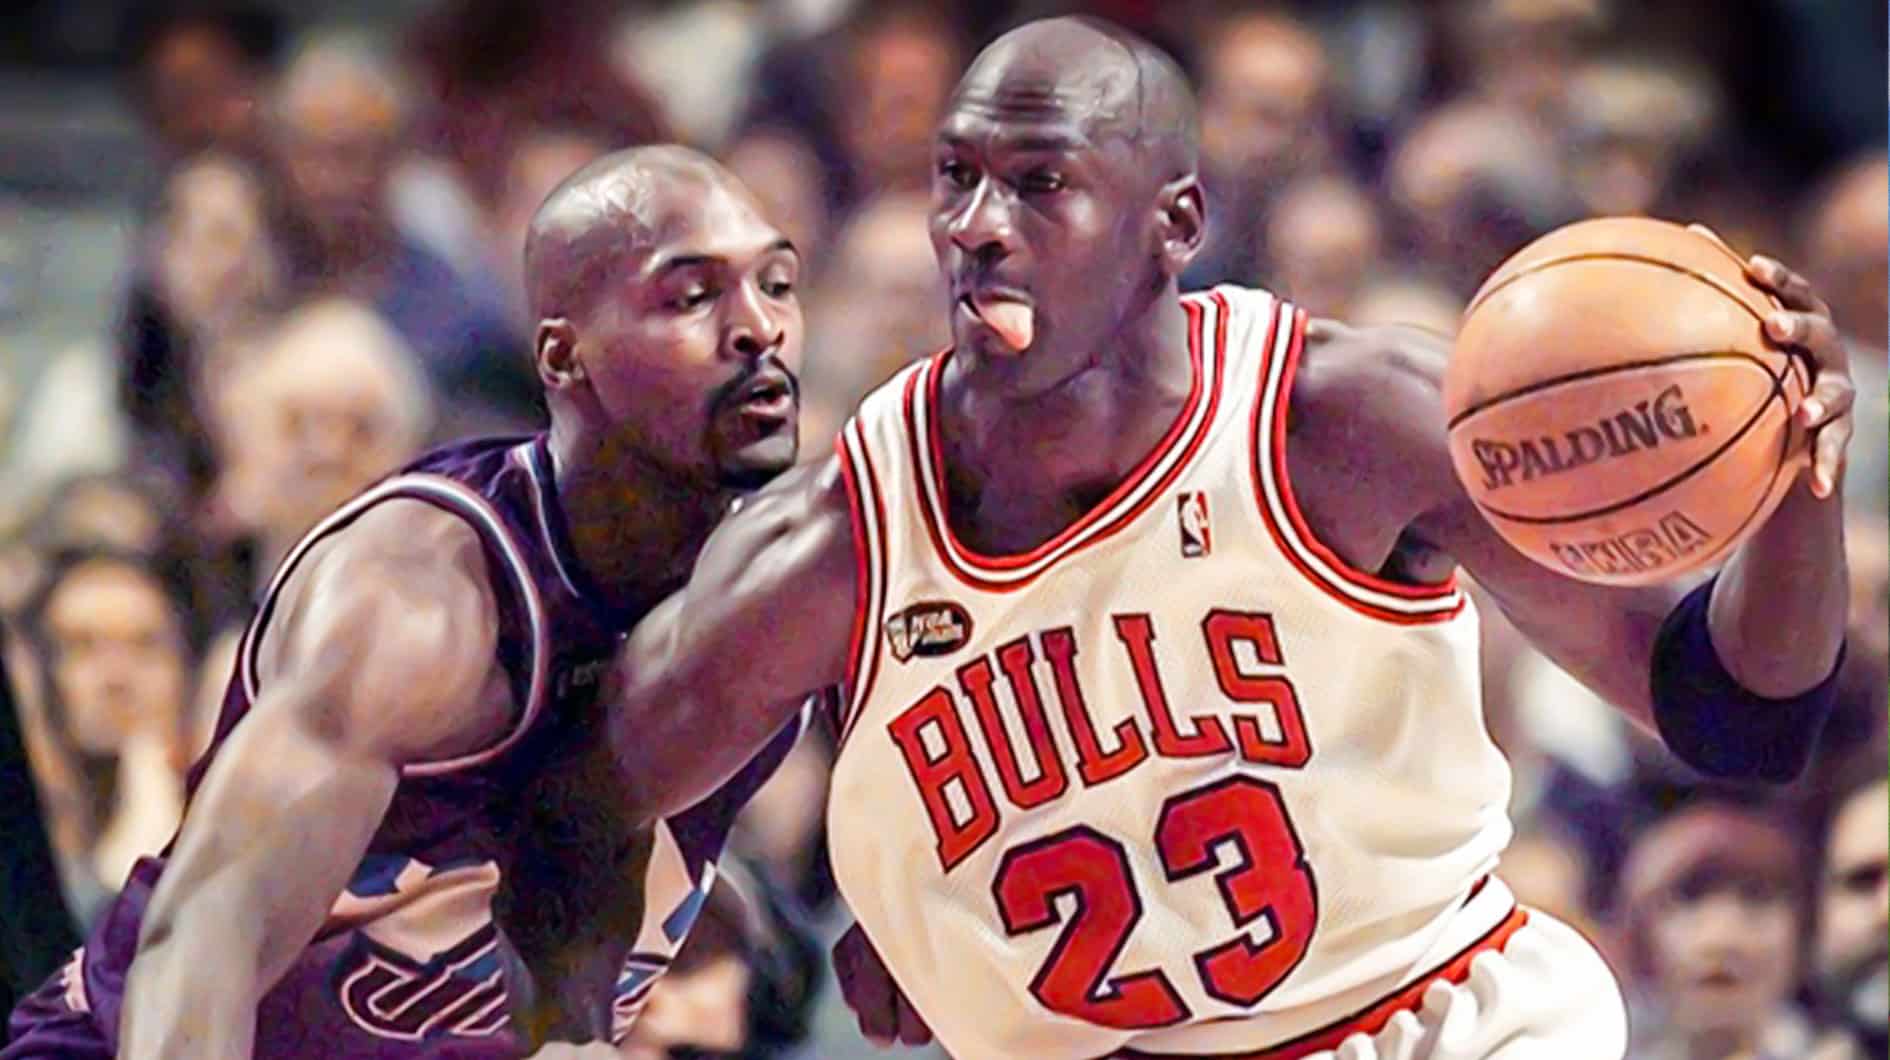 Michael Jordan, the greatest athlete of all time, guarded by Byron Russell in the last dance season